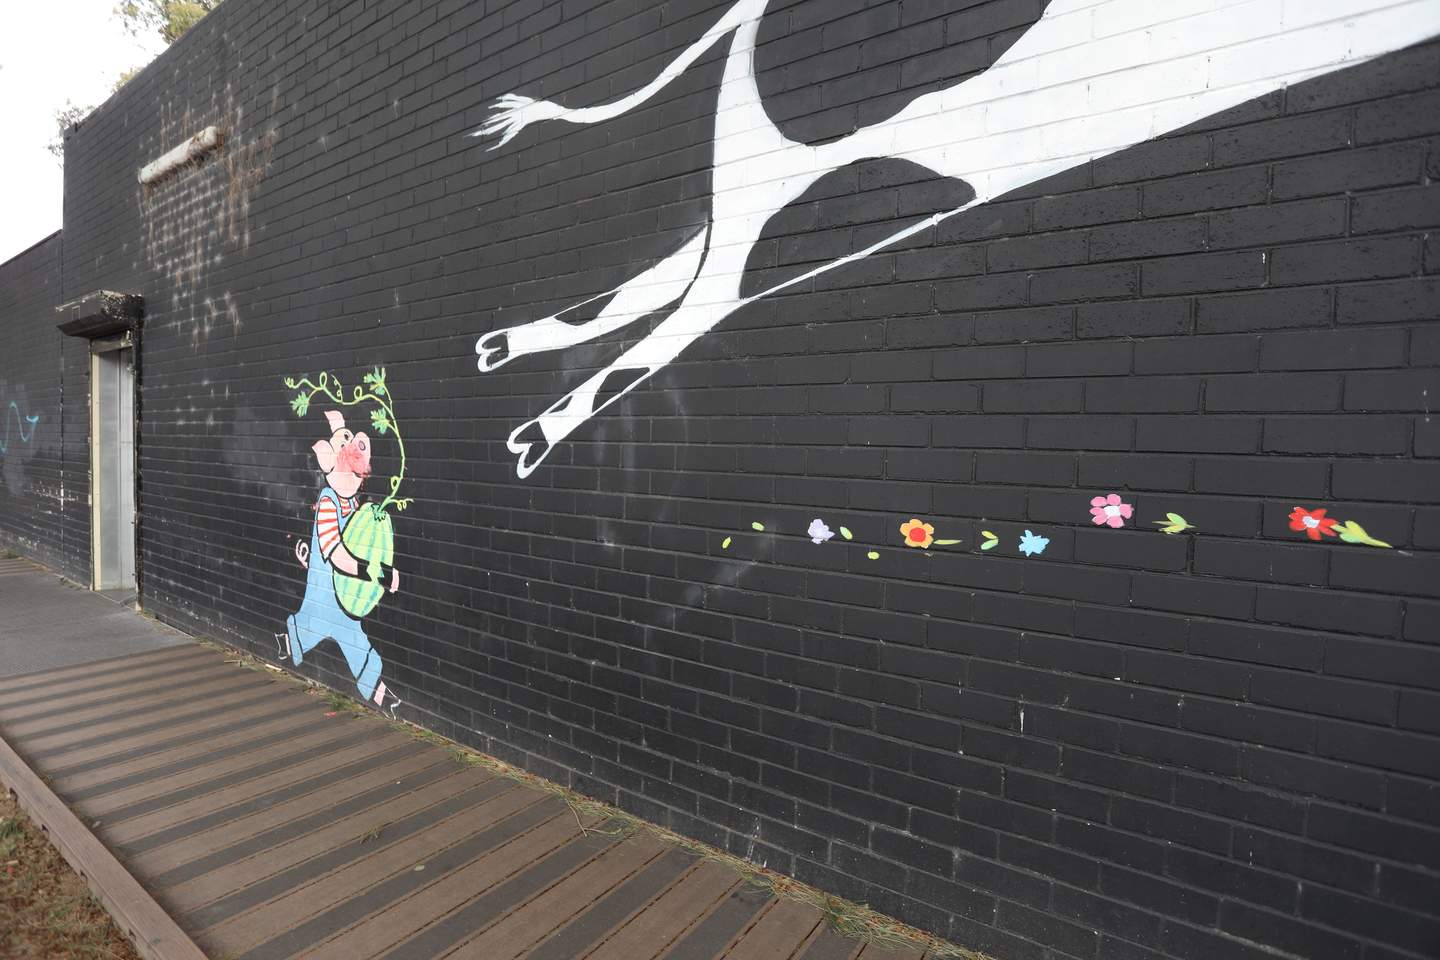 Wall mural on black background. Upright pig in denim overalls holding a vine plant in a green pot, walking towards a cow leaping into the air